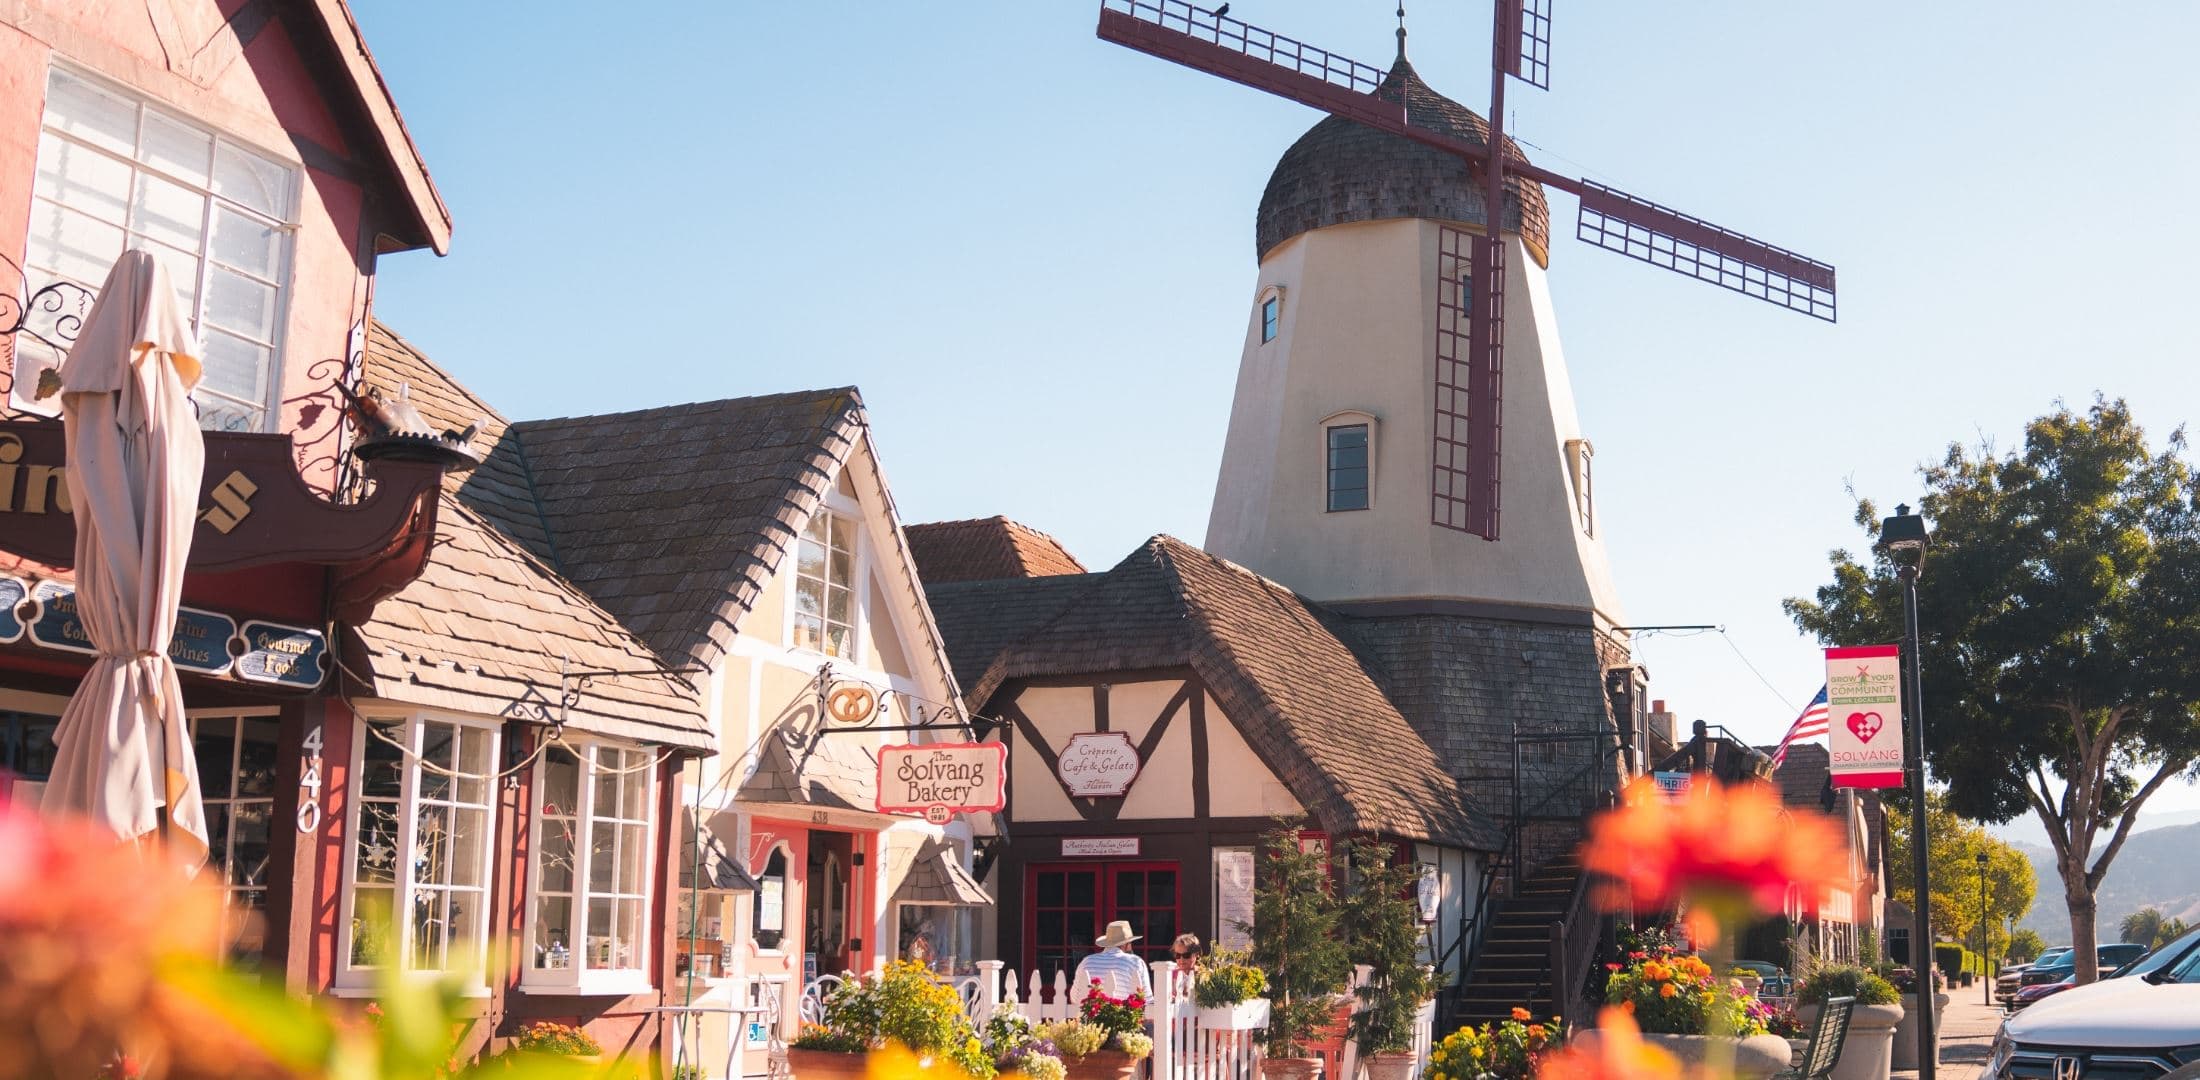 City of Solvang Background Image